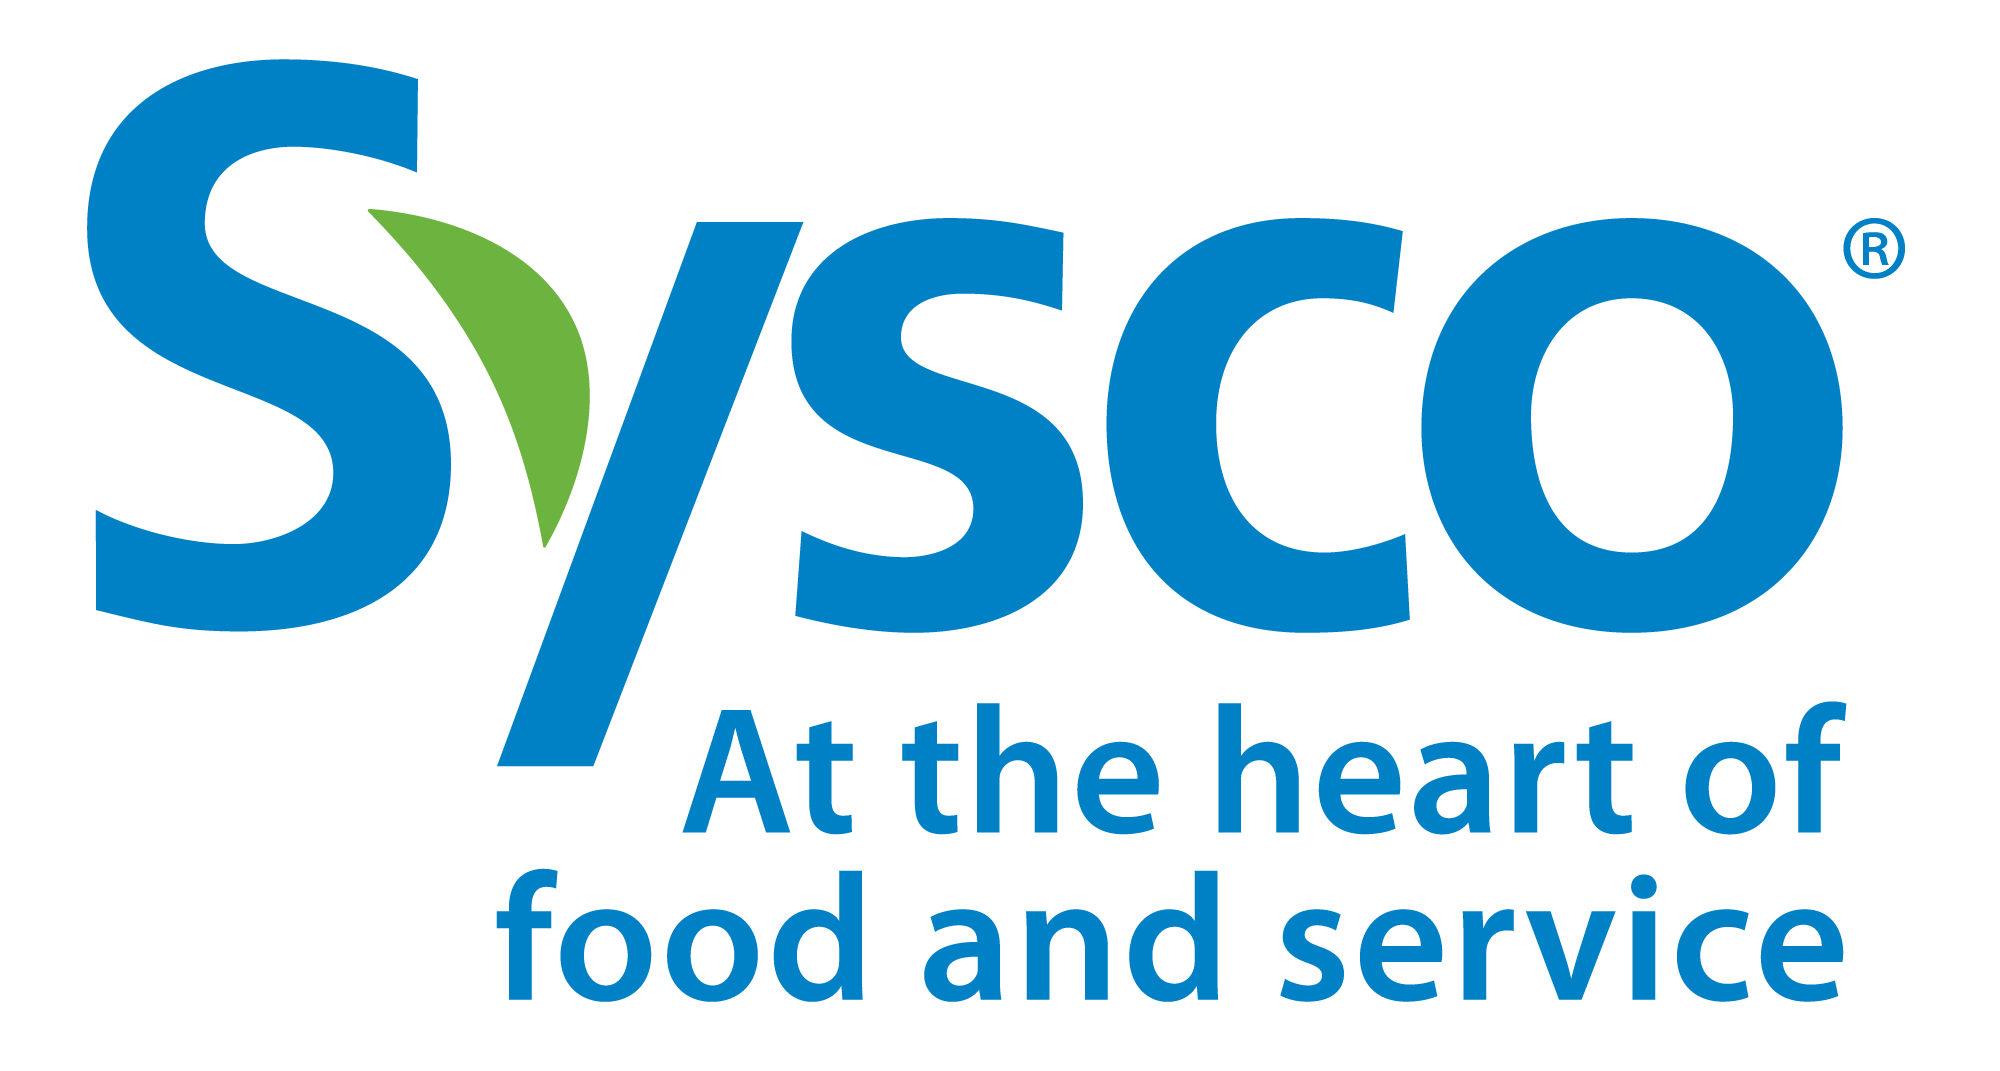 Sysco Canada - From coast to coast, Sysco has thousands of foodservice products in stock. From top quality protein to fresh produce and all of your grocery needs, start ordering today for delivery or pick up as early as tomorrow and become a Sysco Foodie! Sysco is Sponsoring the CEO Panels for Toronto and Vancouver.